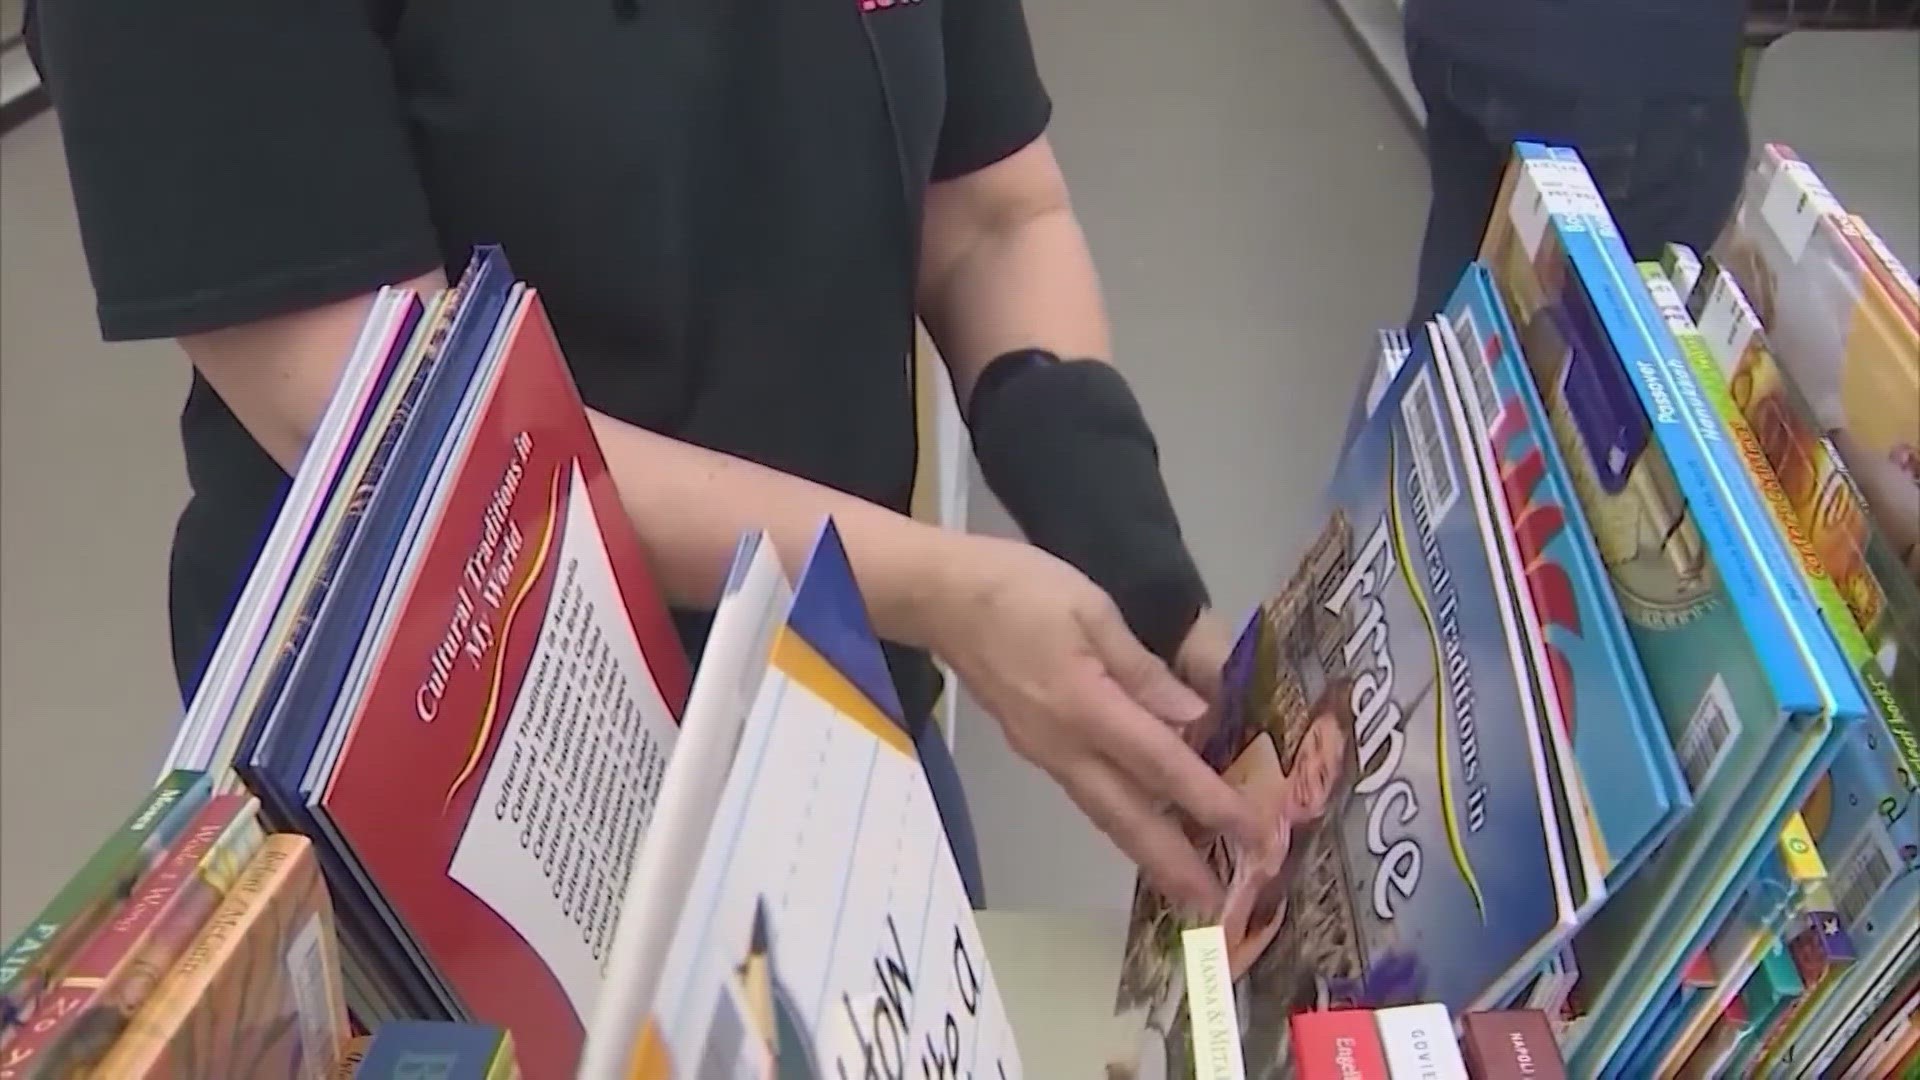 The Fort Worth Independent School District (FWISD) has closed all of its district libraries to re-examine books on its shelves, according to a district spokesperson.